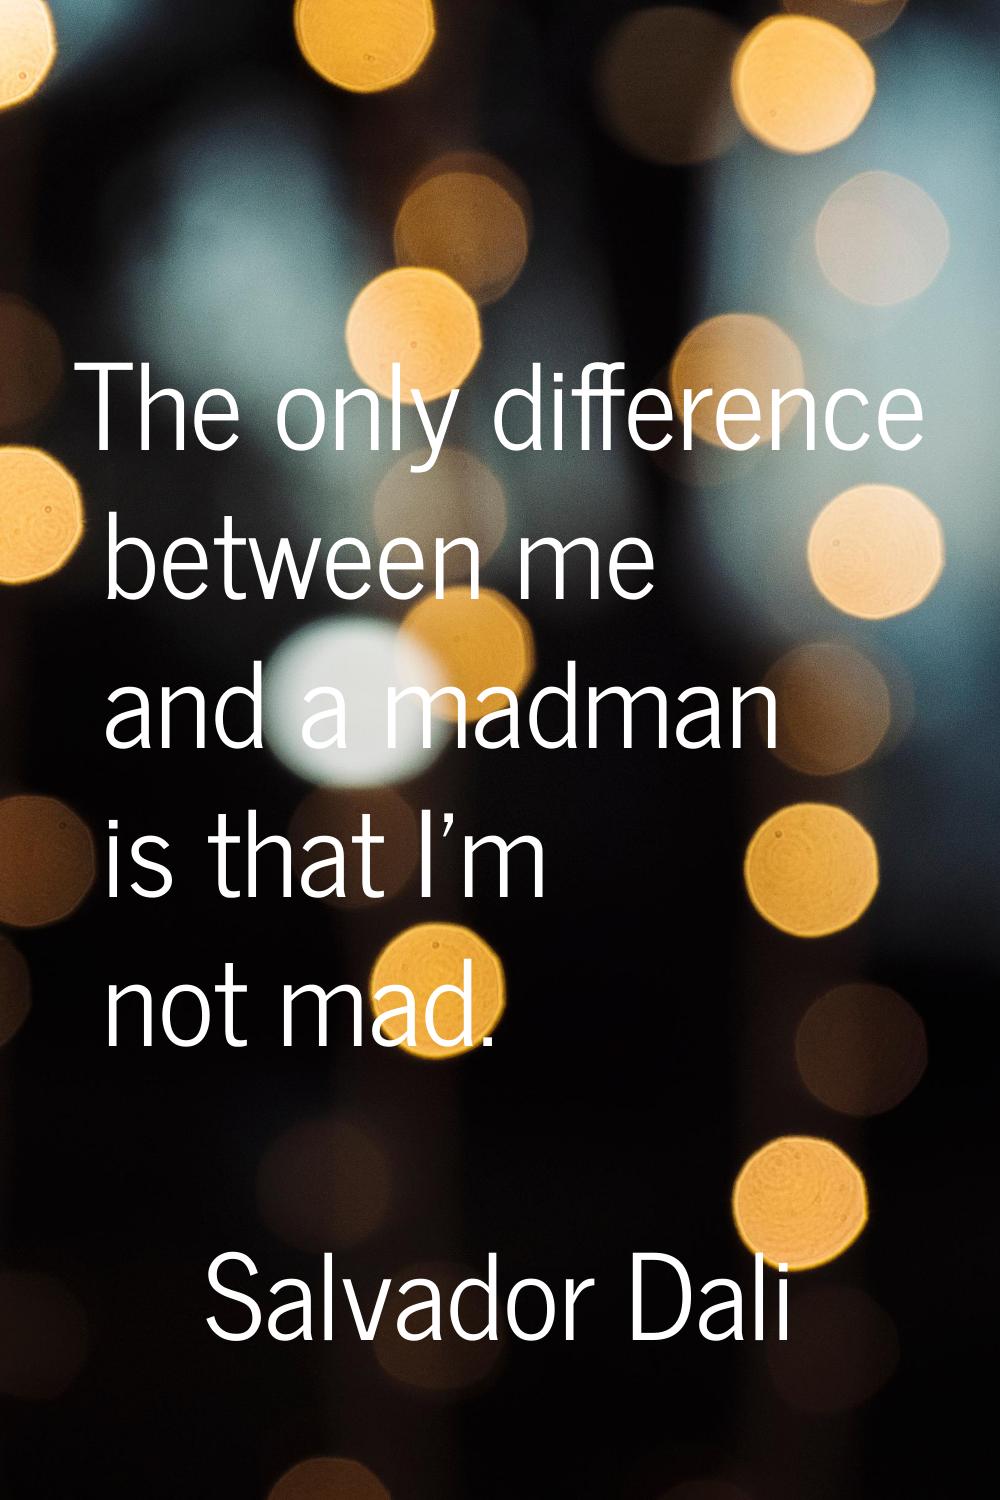 The only difference between me and a madman is that I'm not mad.